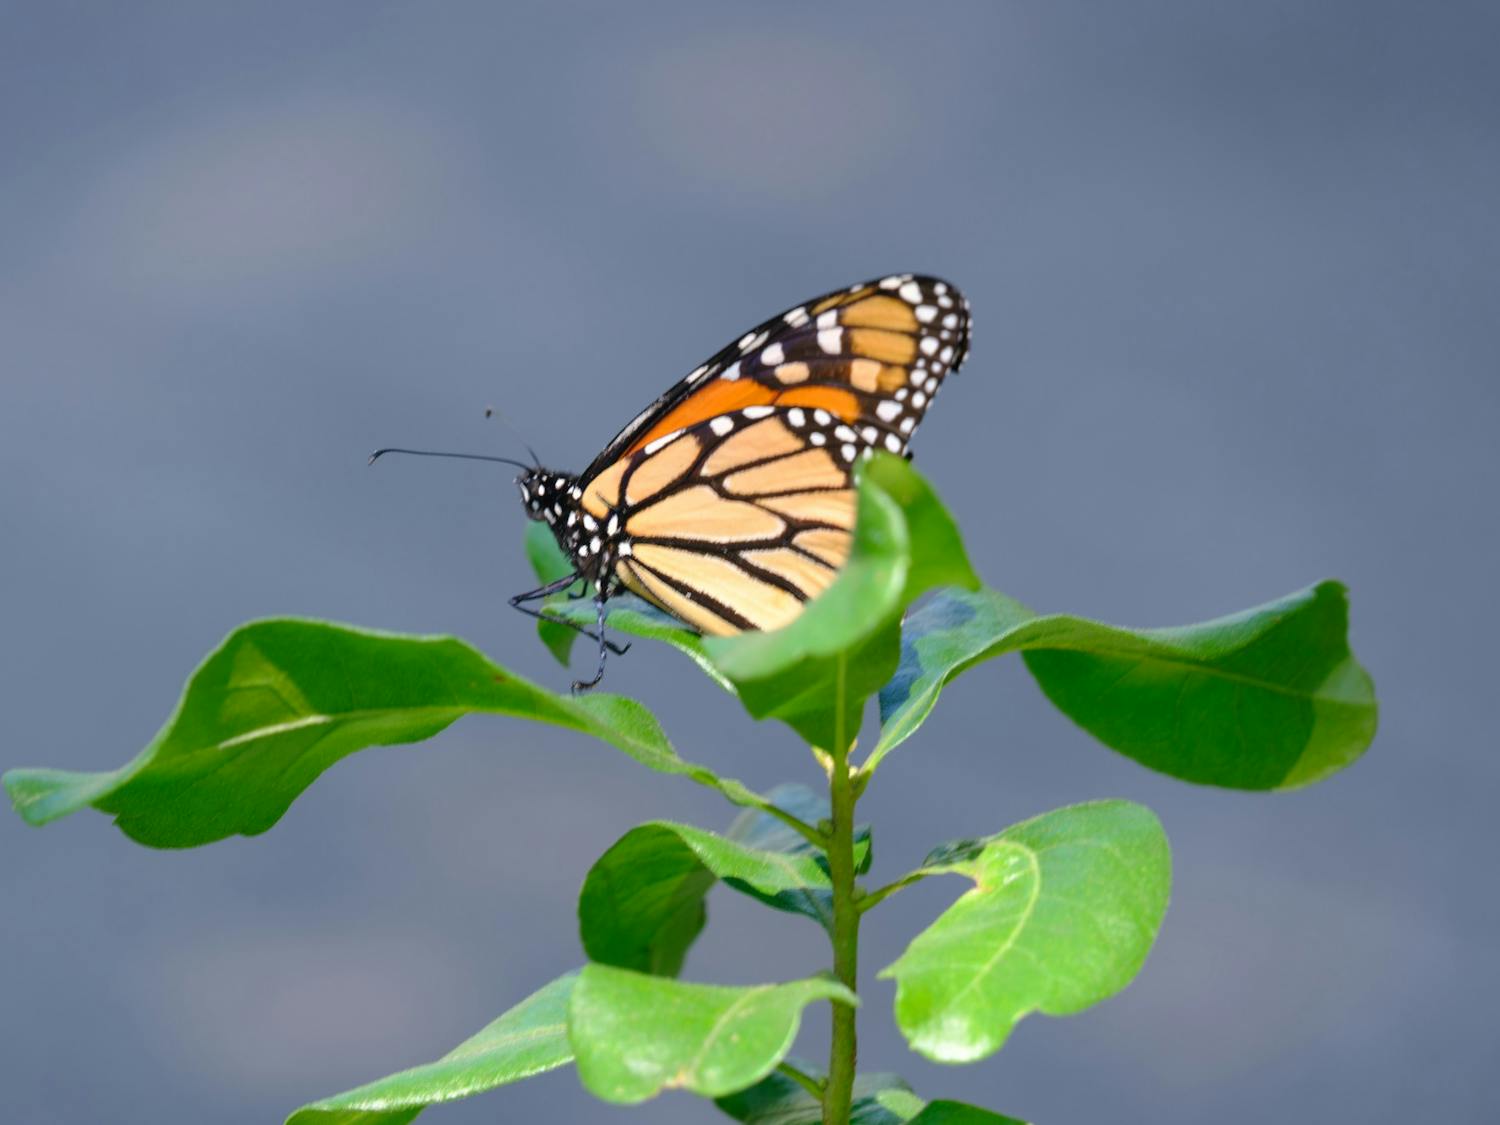 Photo Essay: Butterfly Migration